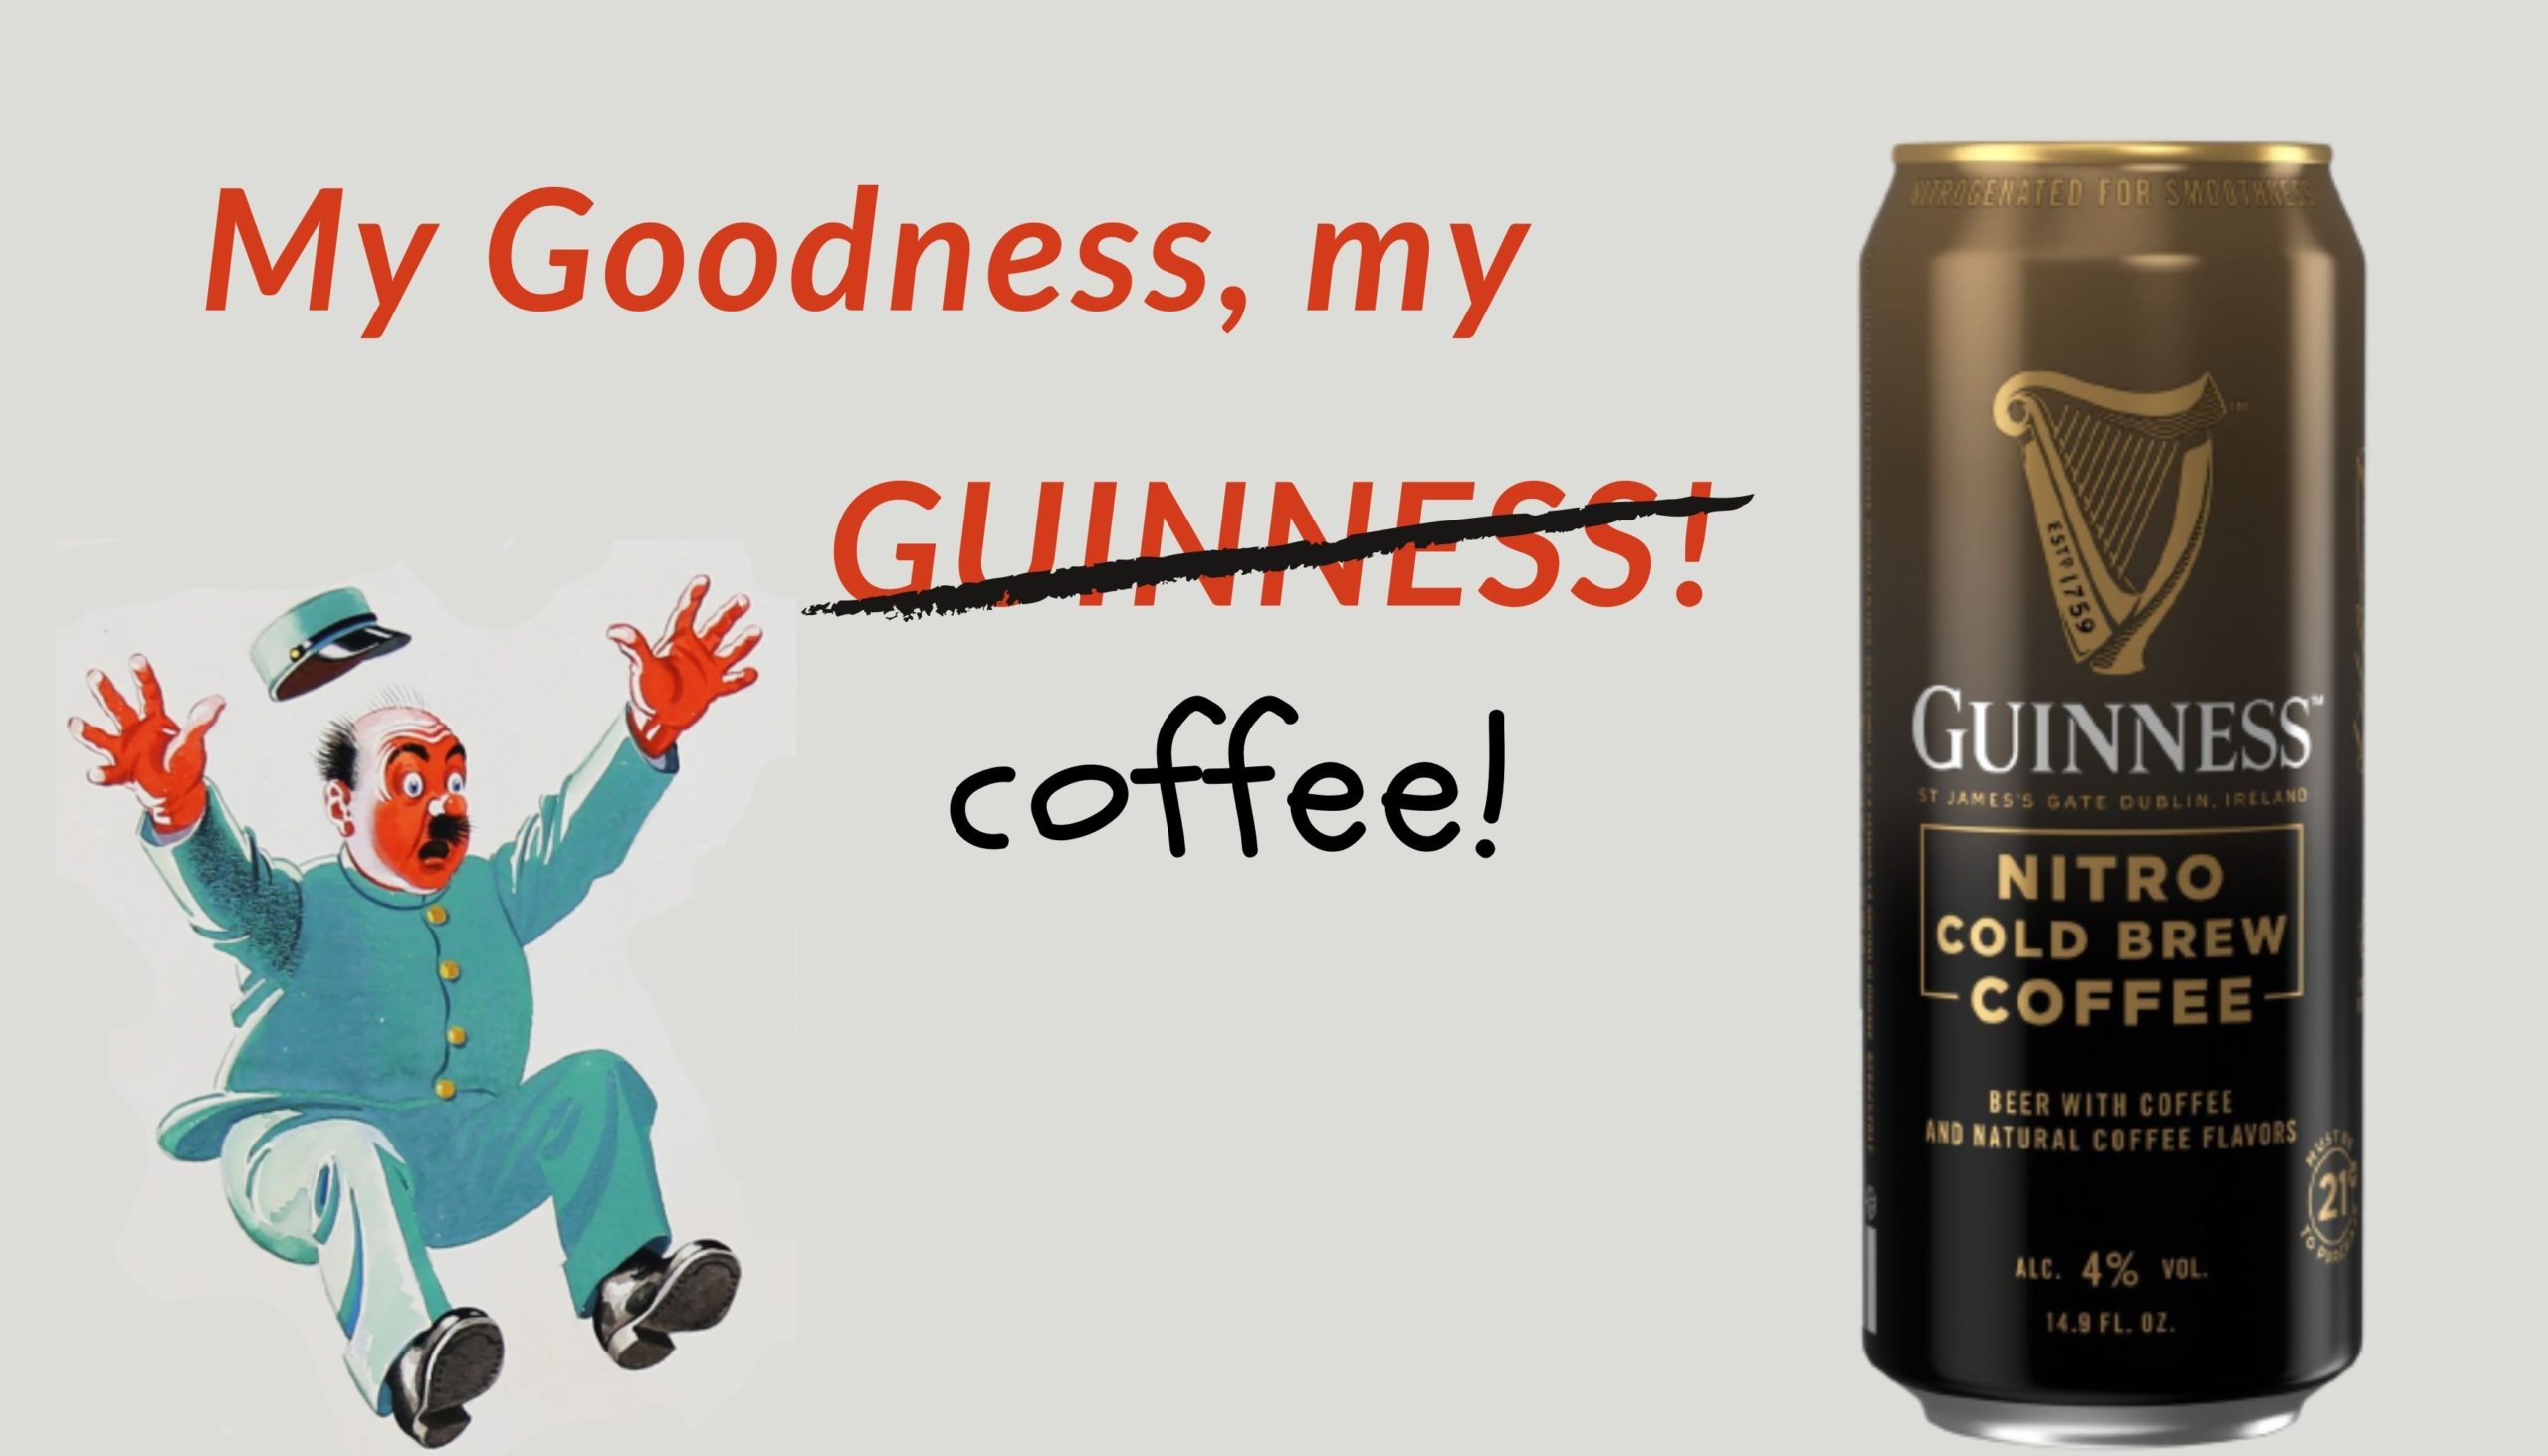 guinness-nitro-cold-brew-coffee-beer-coffeecode (1)